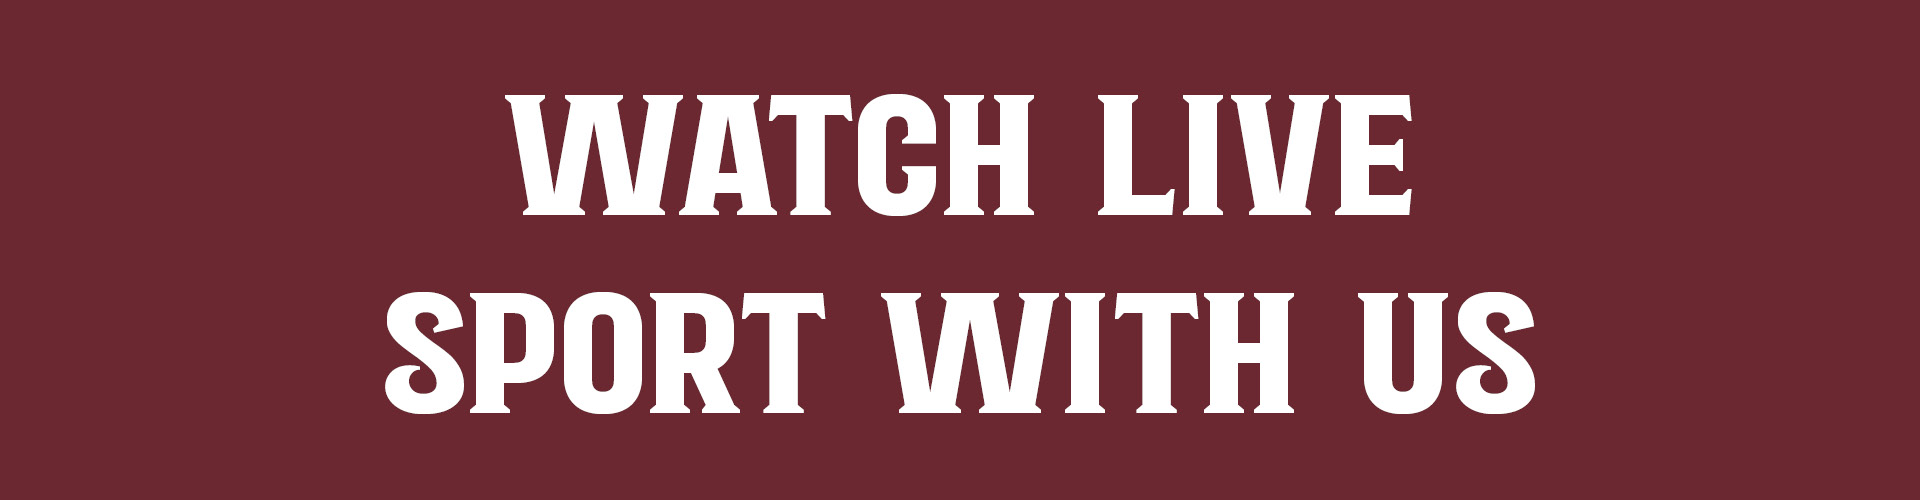 Watch live sport in Stoke-On-Trent at The Windmill Meir Heath pub